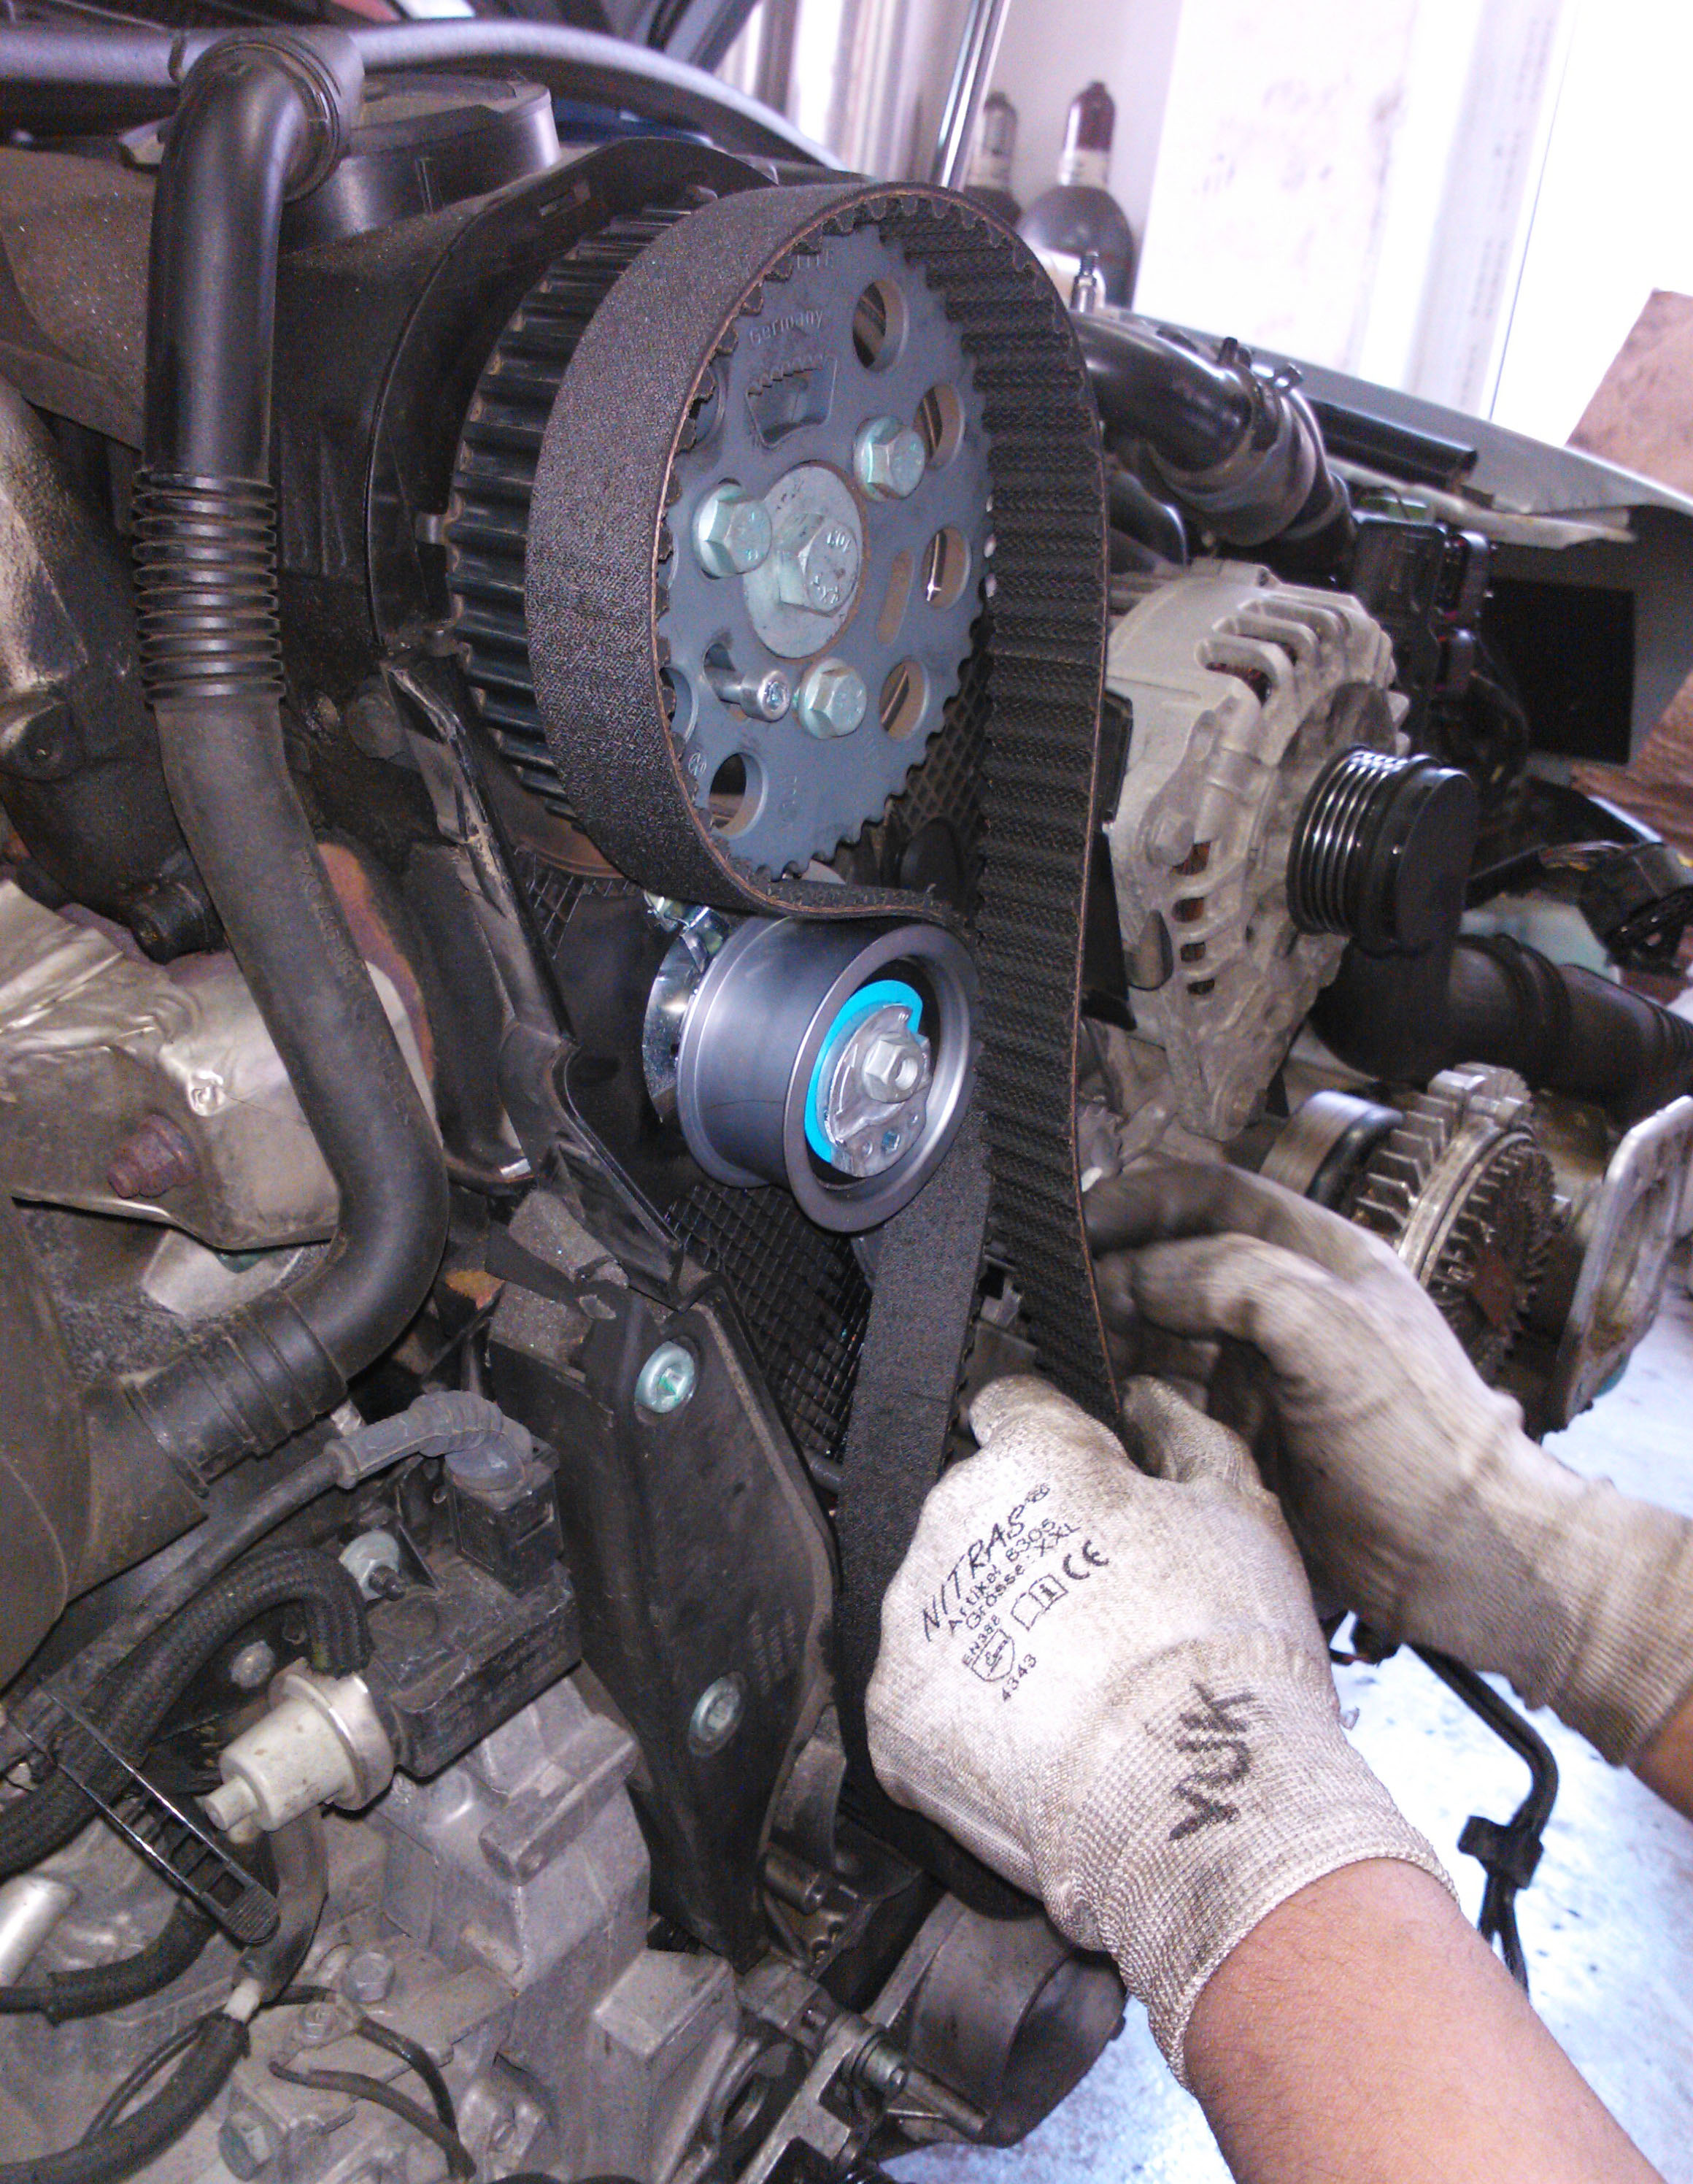 How To Know When To Change Timing Belt How to Tell If Your Car Needs a New Timing Belt - JB Tools Inc.